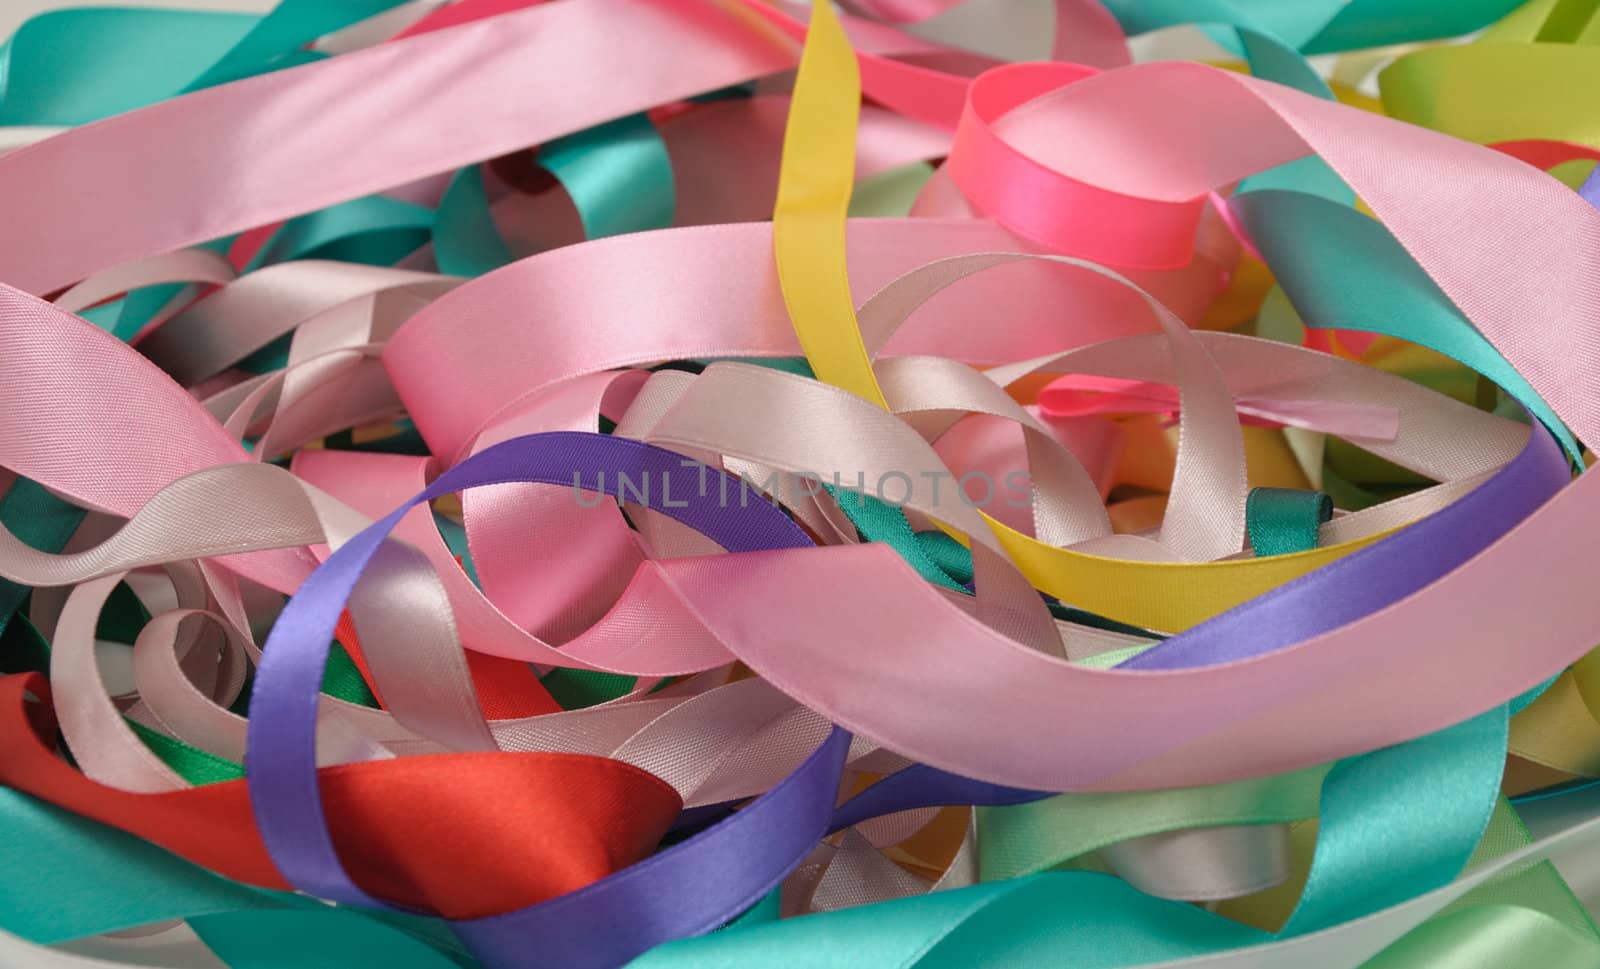 Multi-colored satin ribbons in a chaotic manner closeup